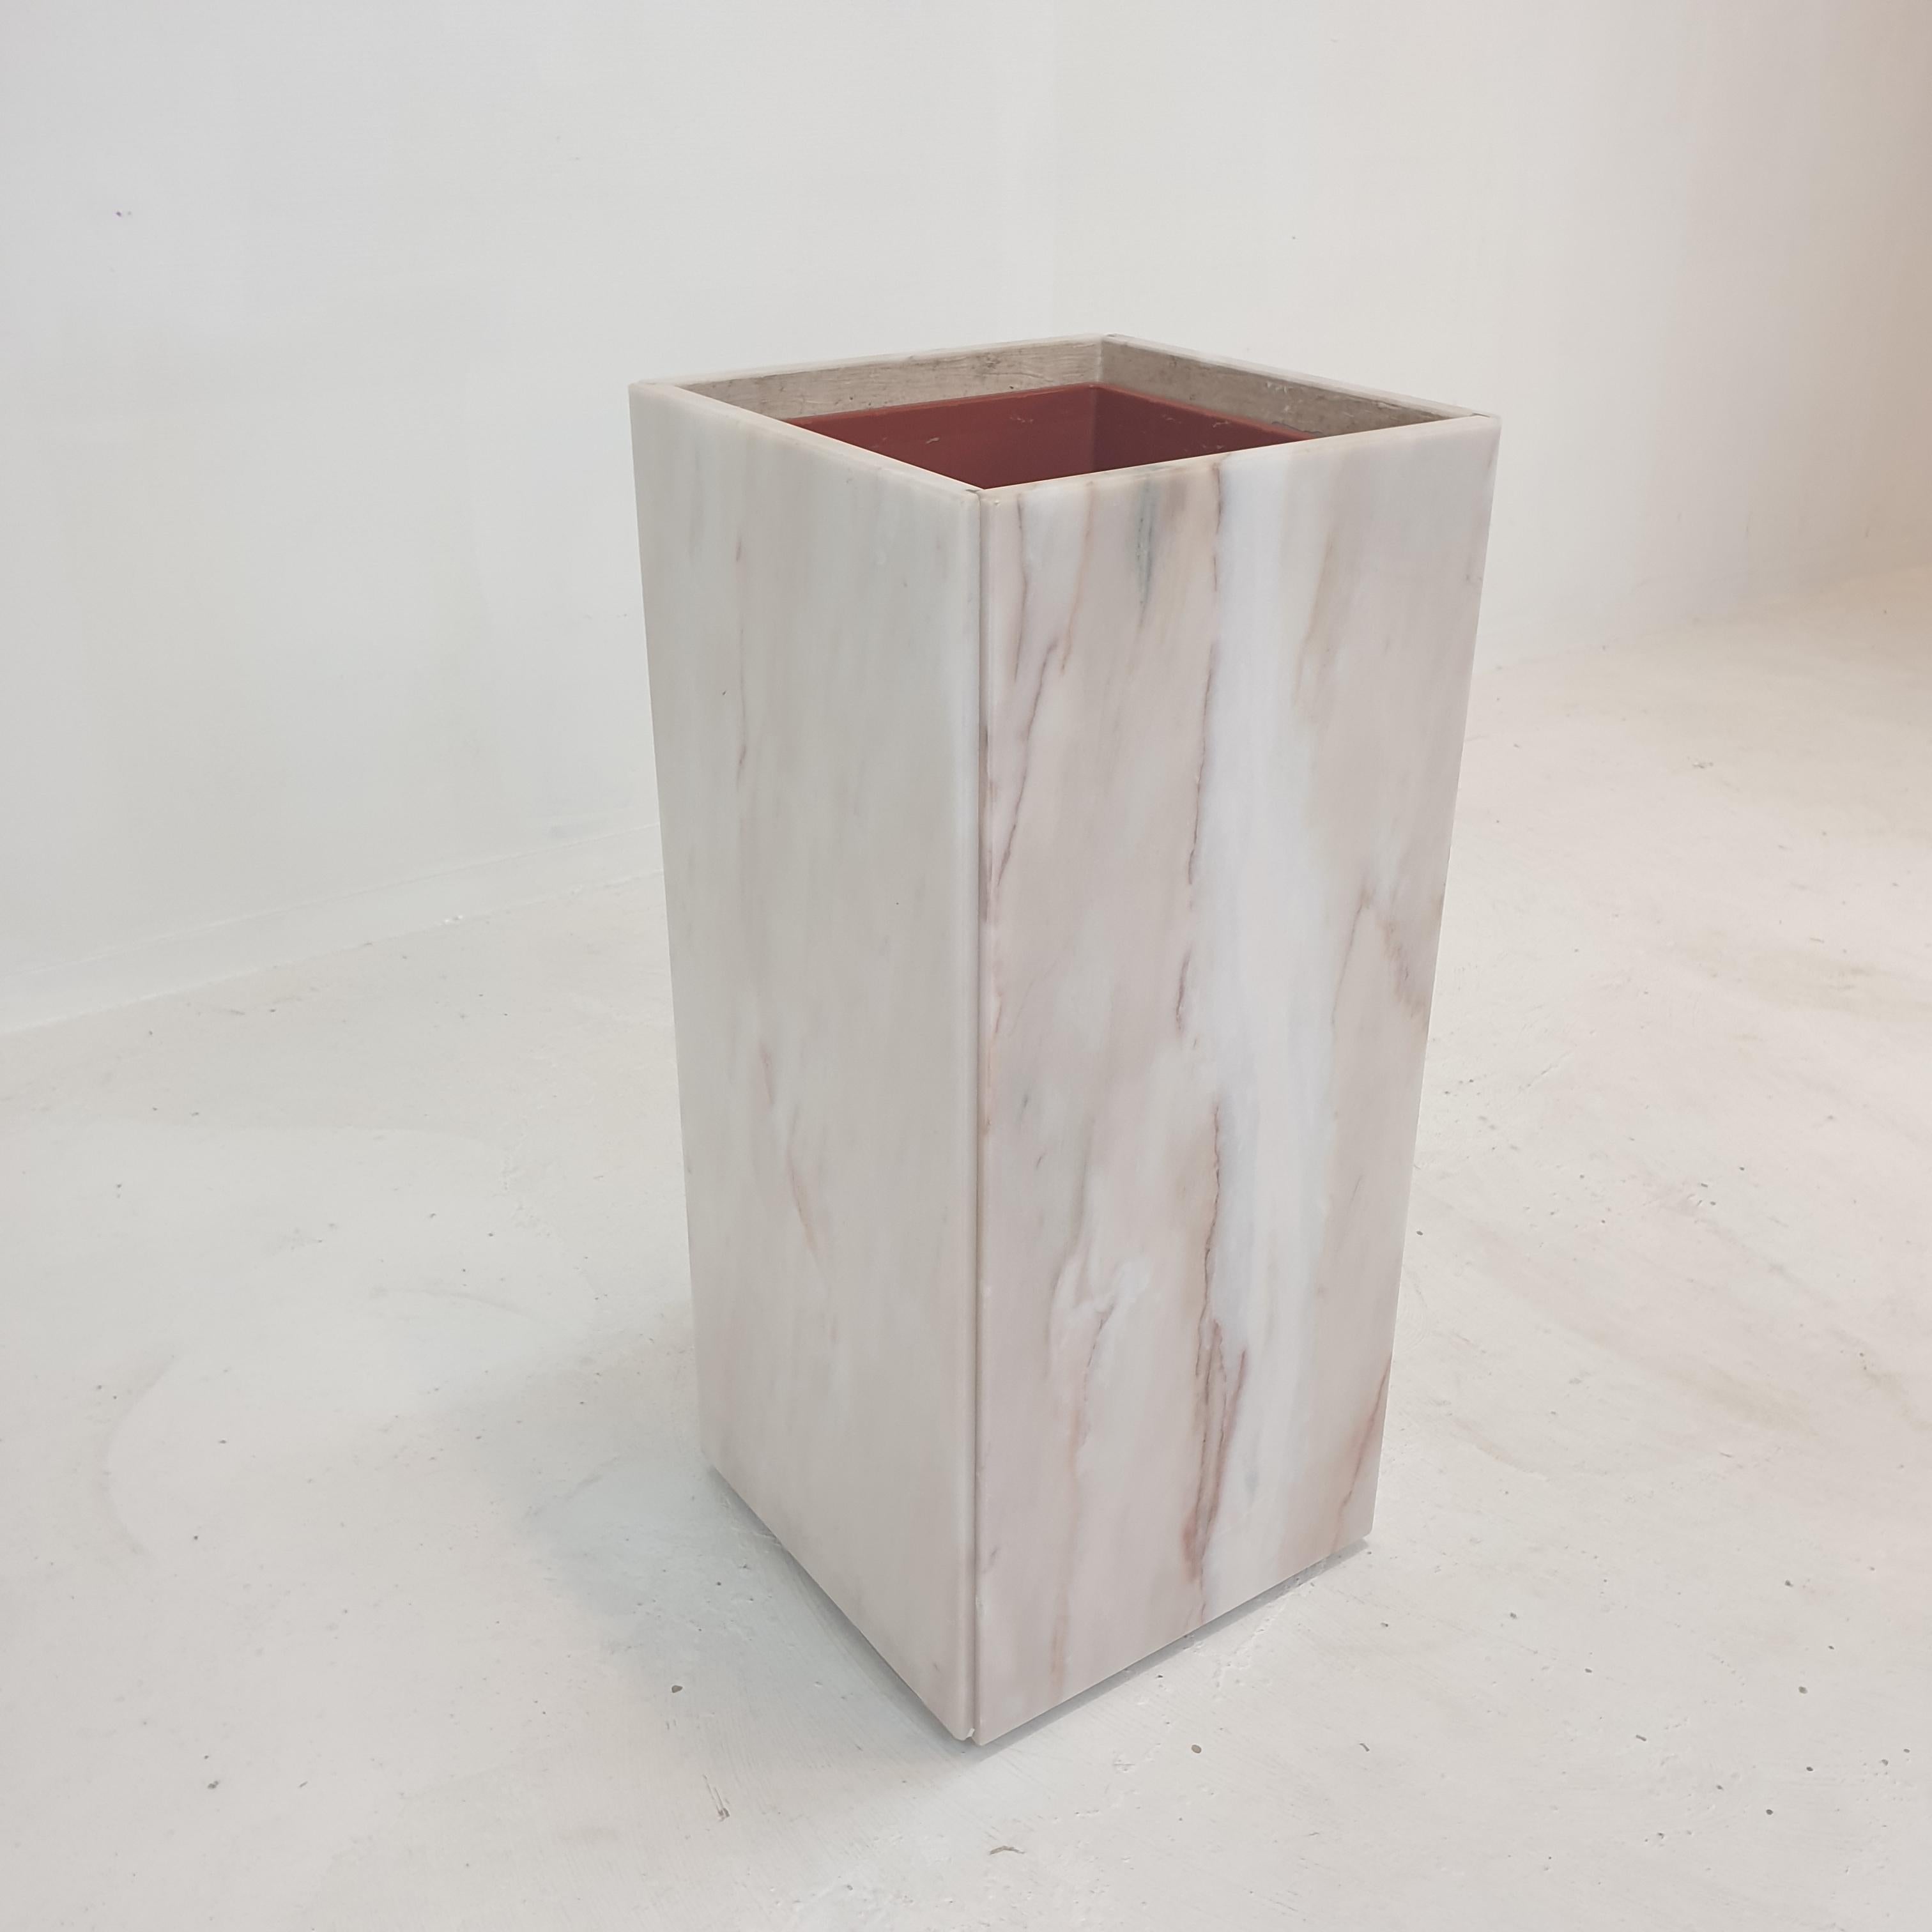 Italian Marble Planter or Pedestal with Light, 1970's For Sale 2